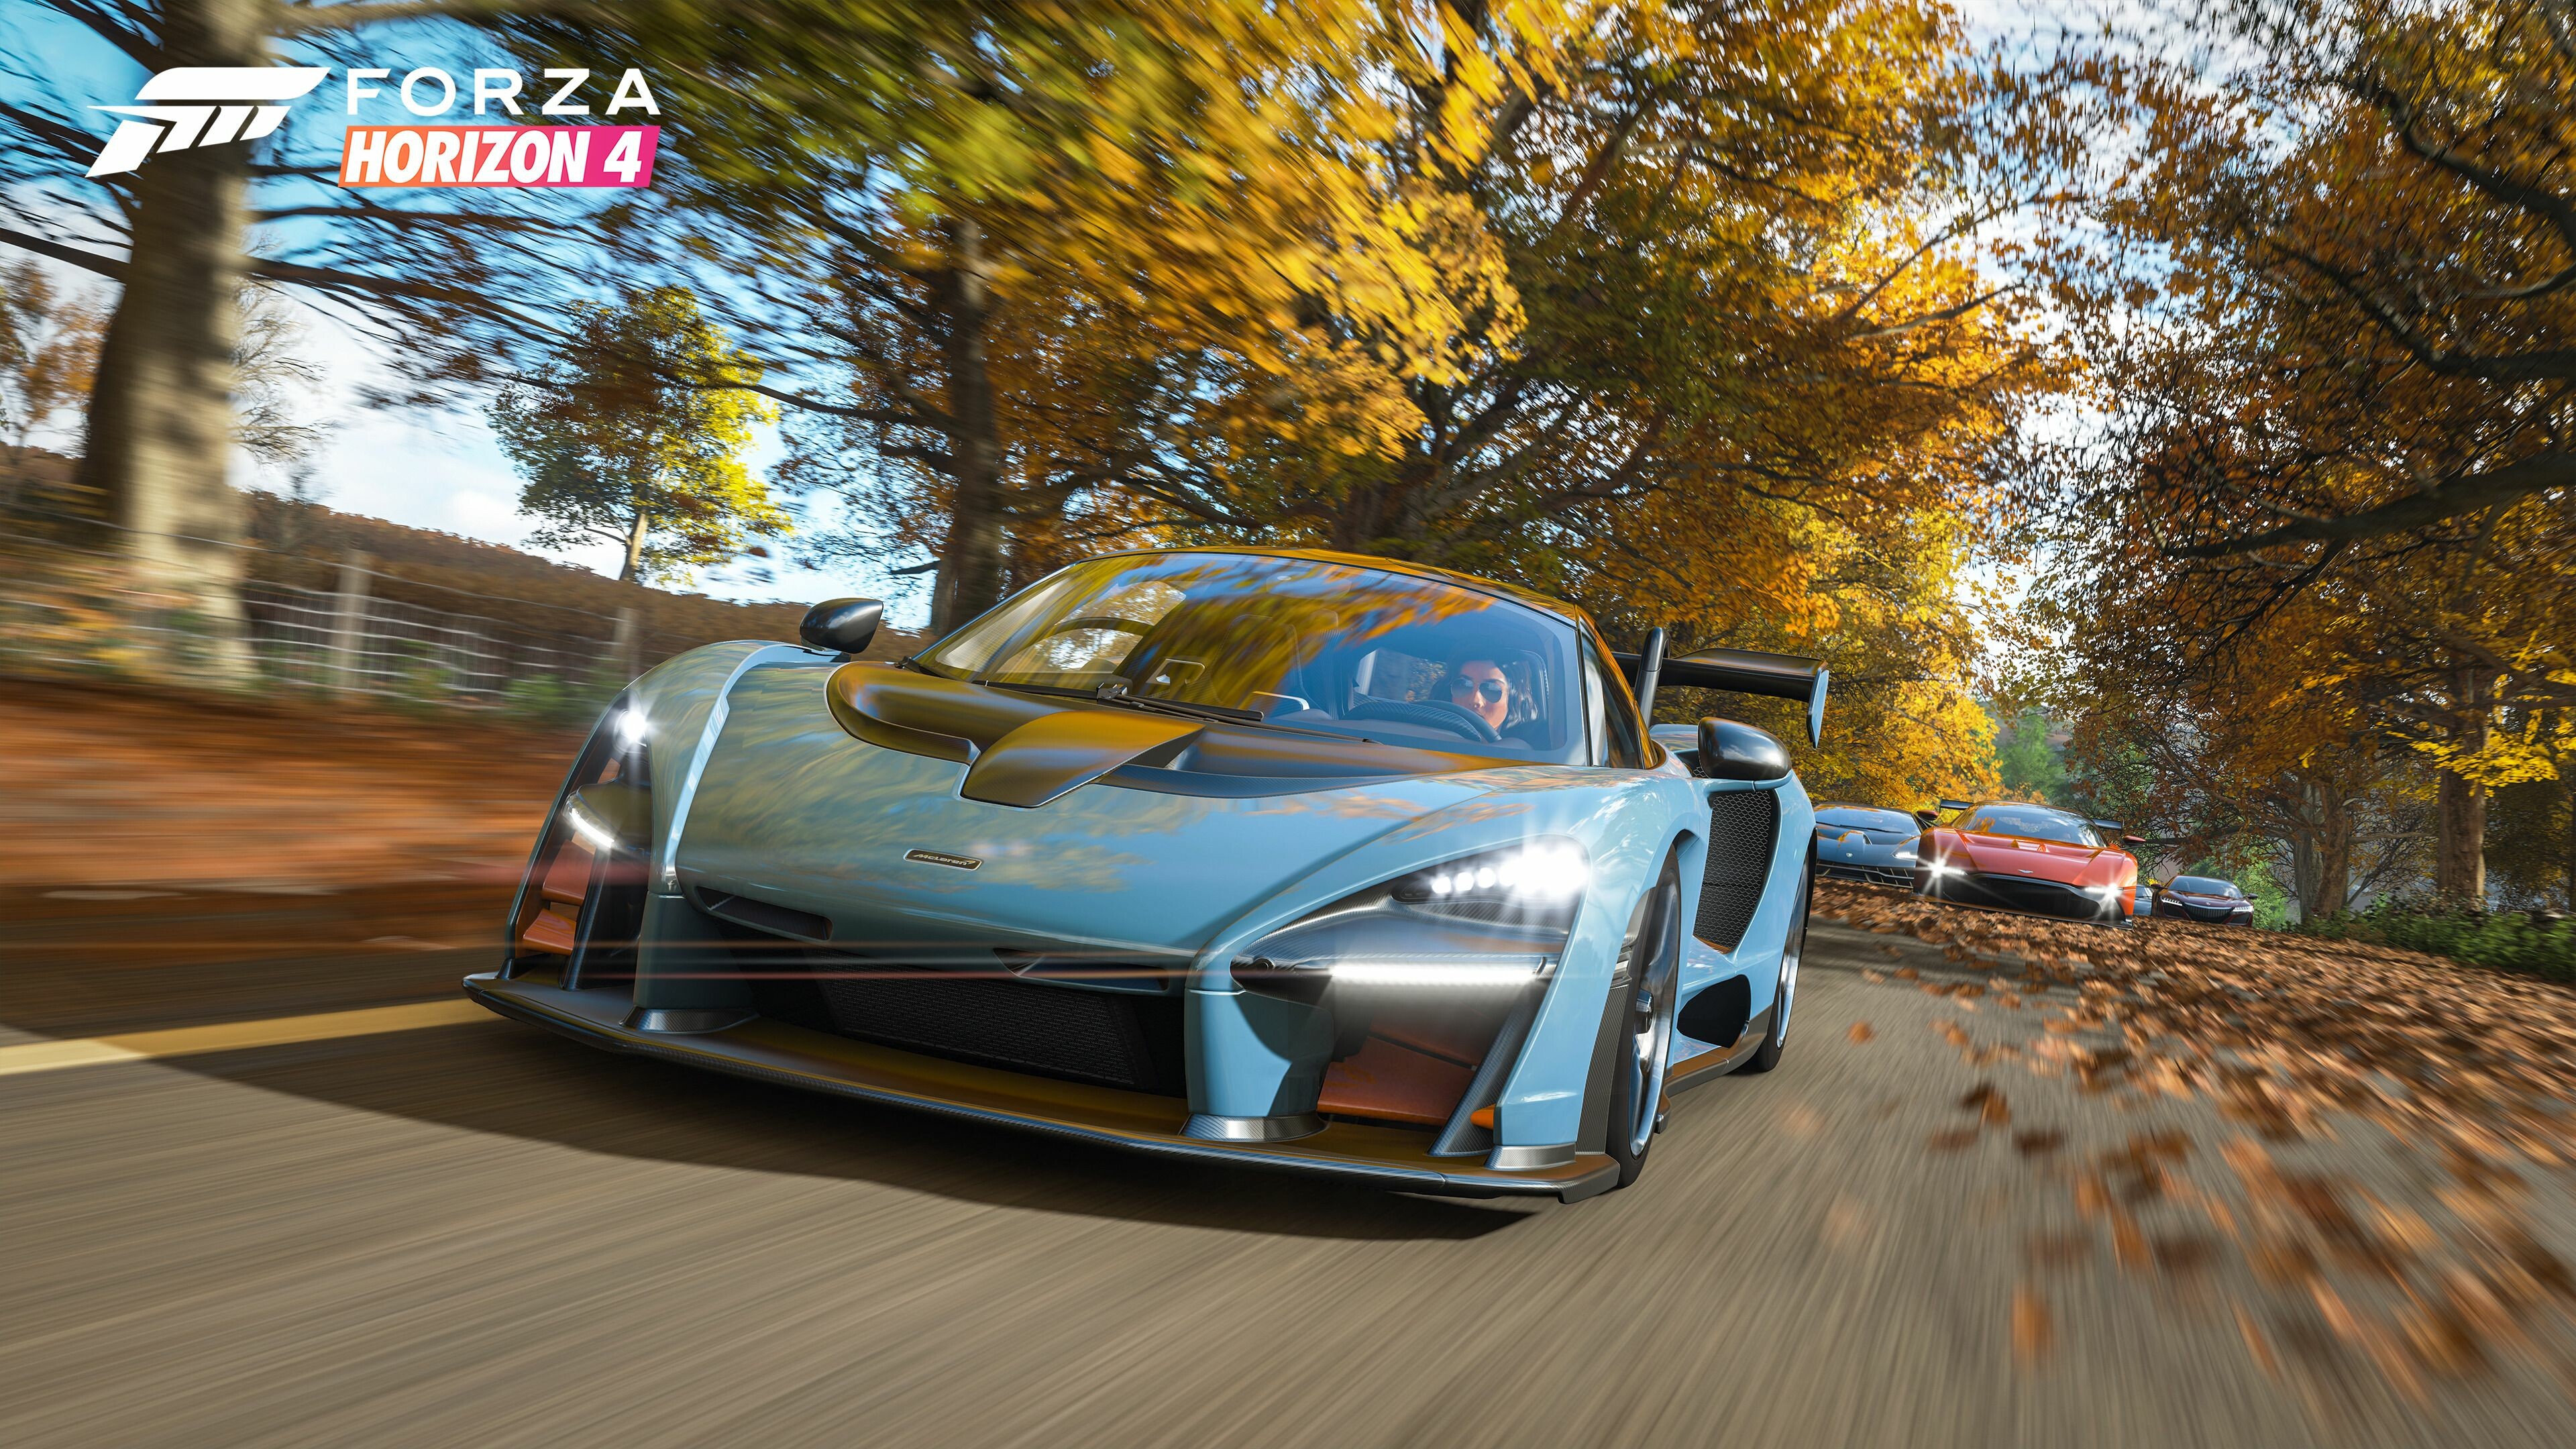 Forza Horizon: A 2018 racing video game developed by Playground Games. 3840x2160 4K Background.